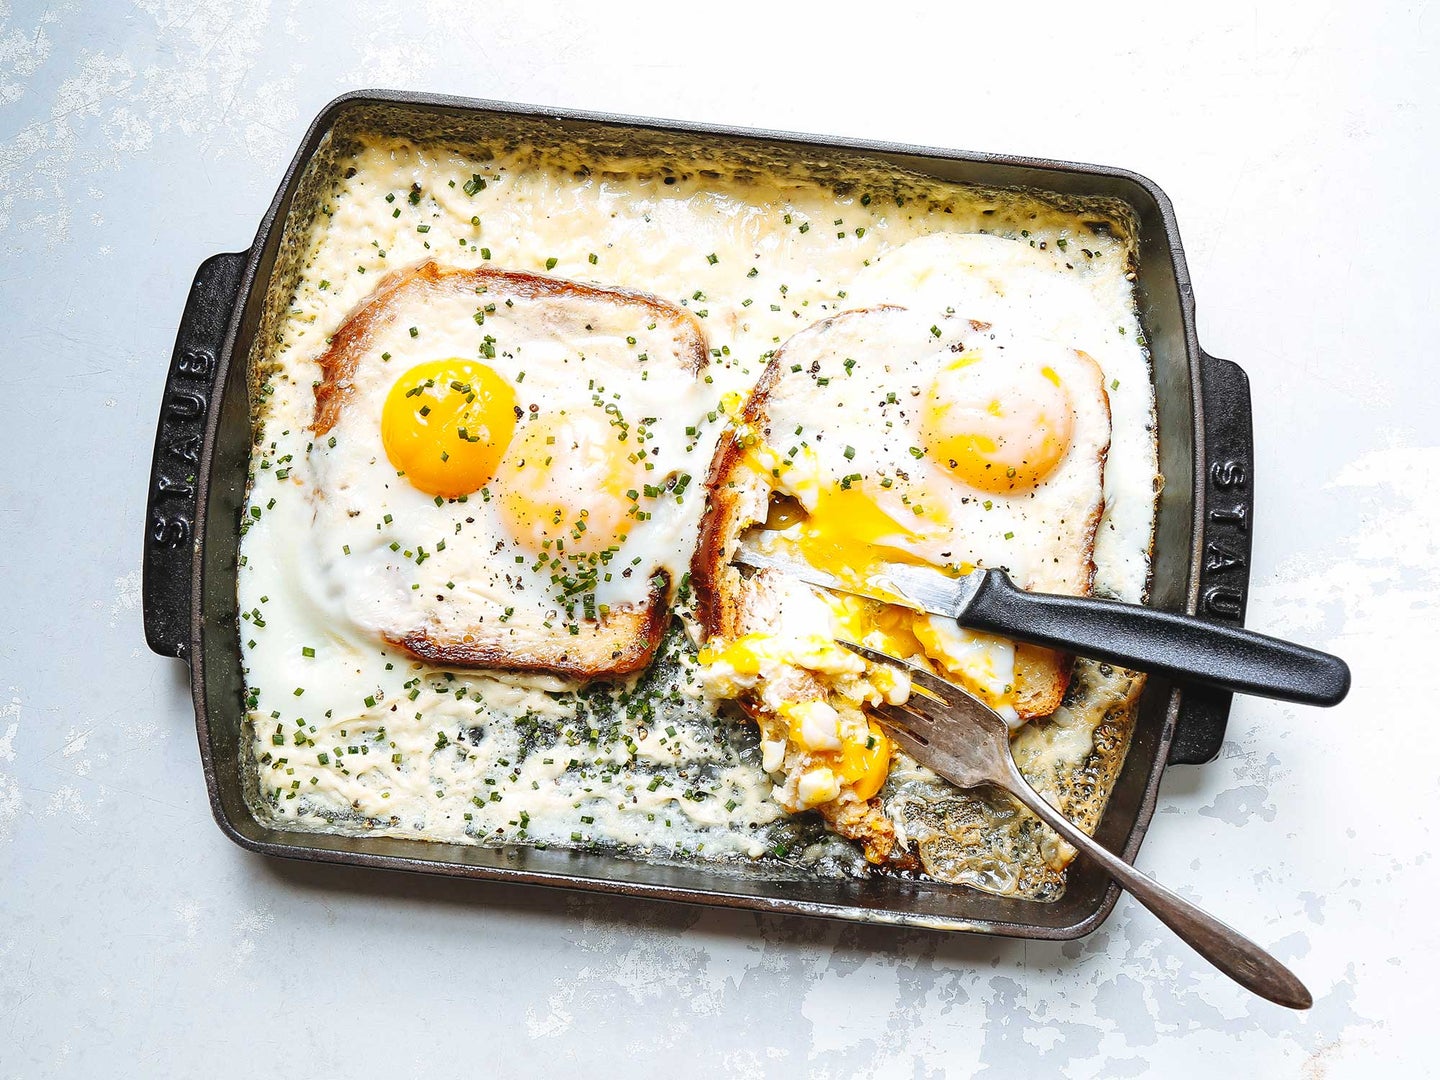 Baked French Toast with Cream and Eggs (Oeufs au Plat Bressanne)